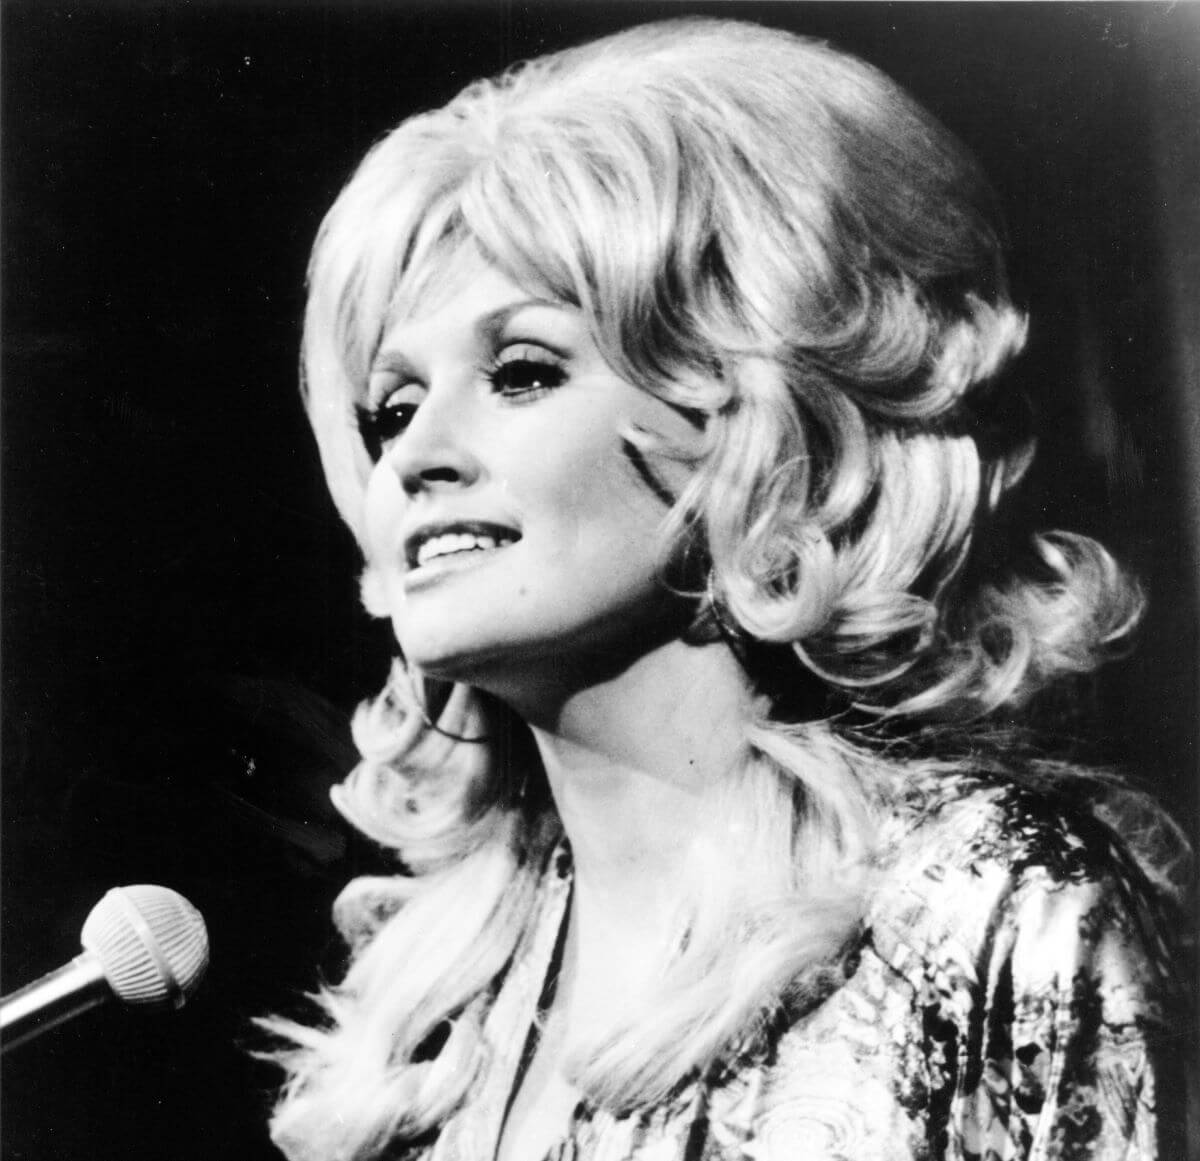 A black and white picture of Dolly Parton standing in front of a microphone.